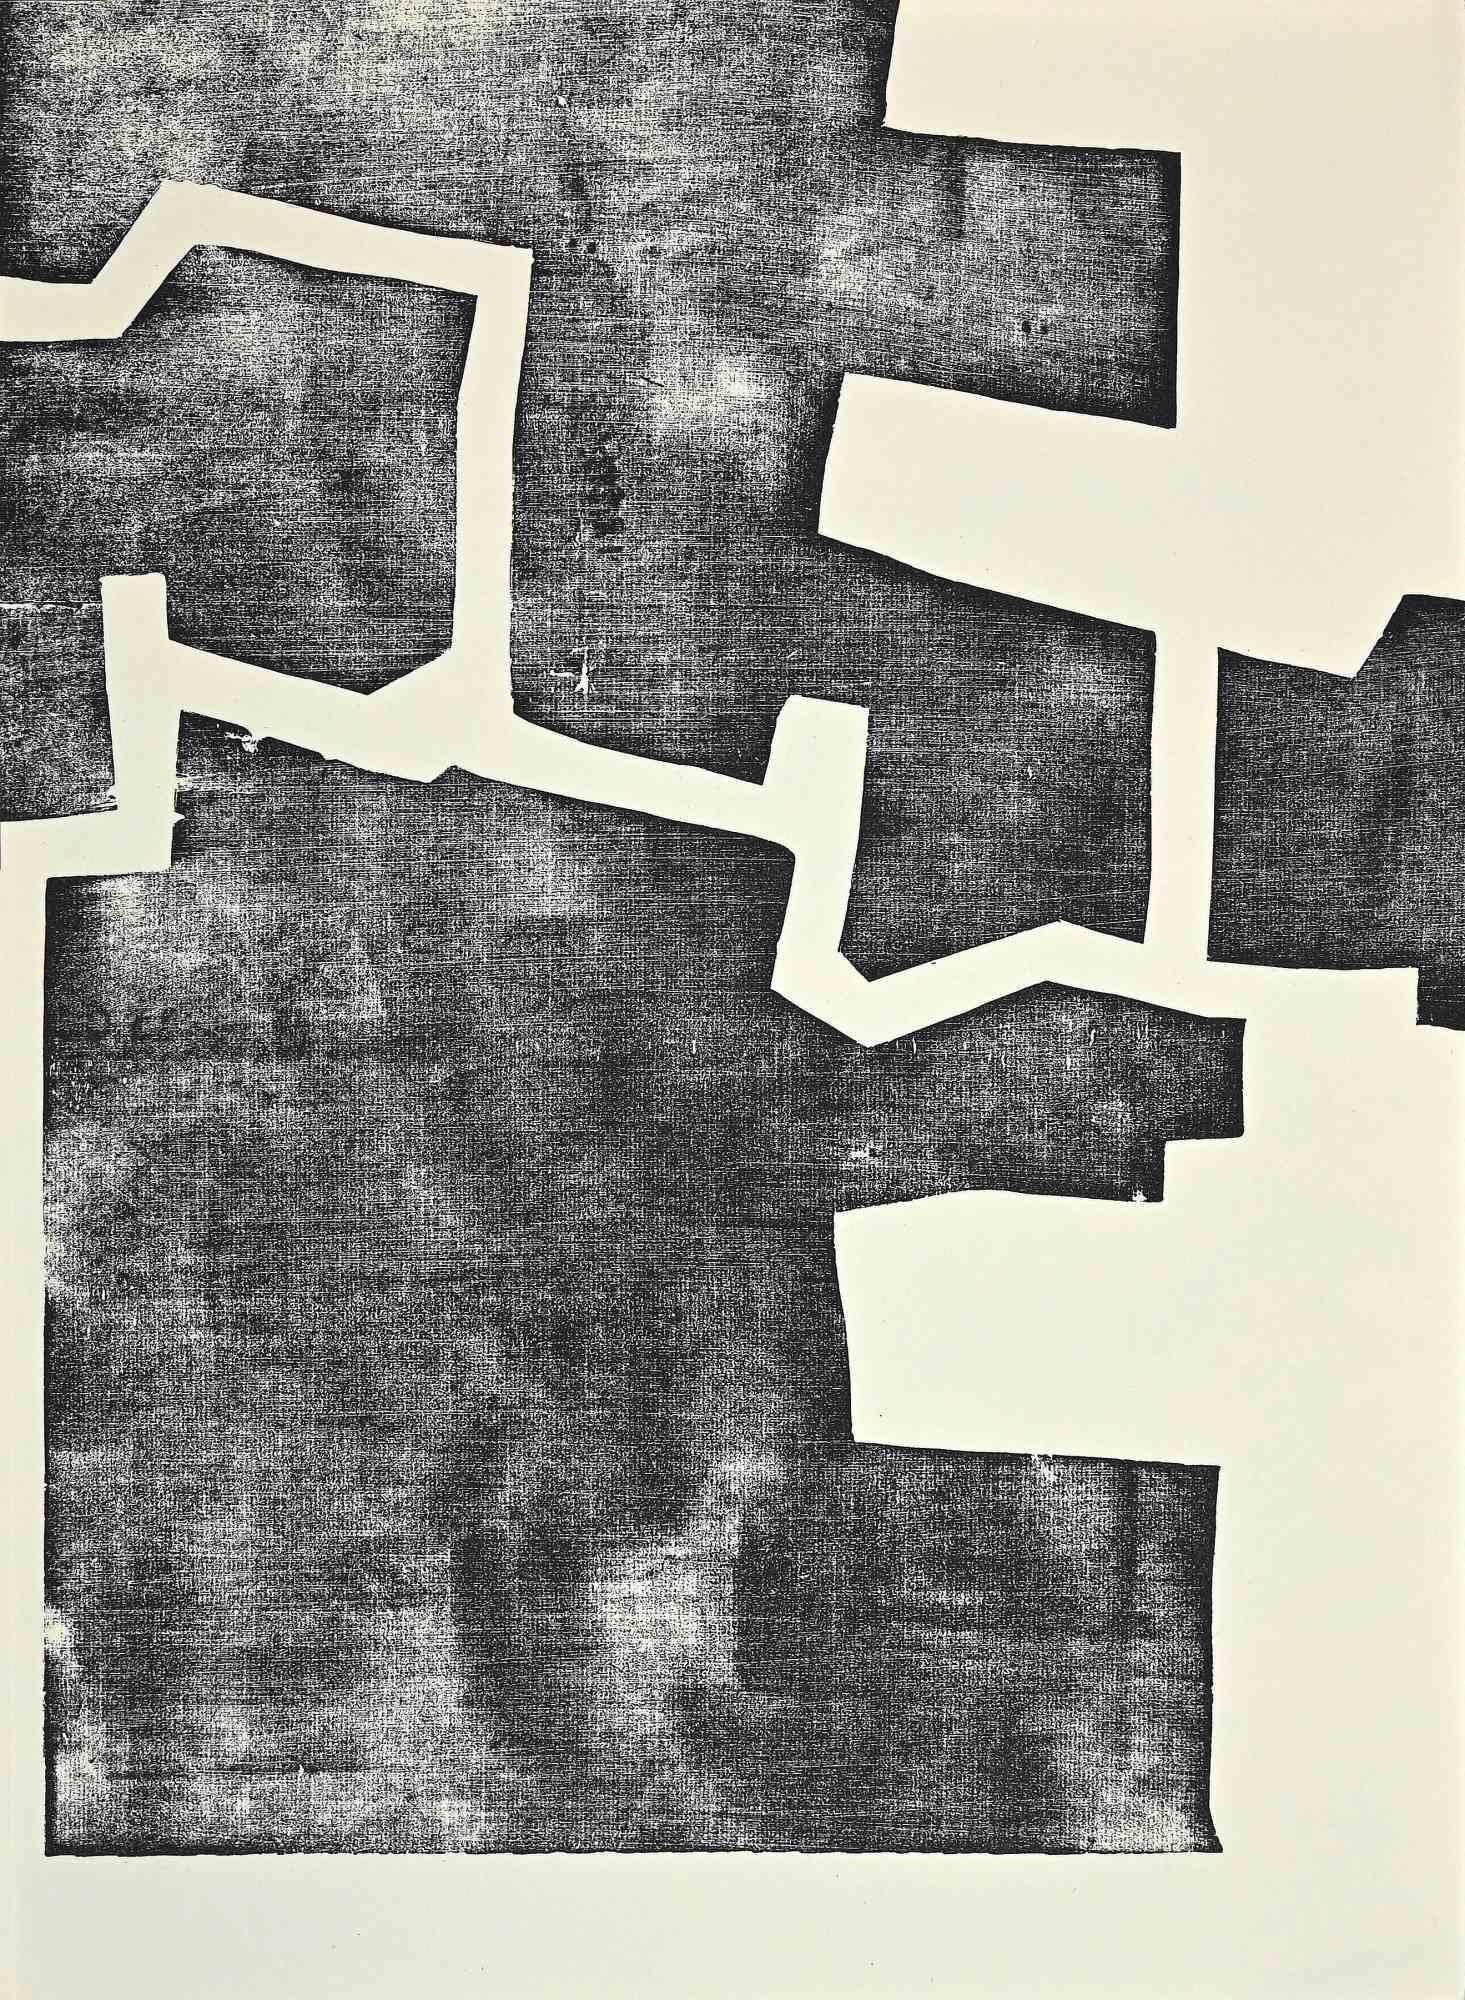 Composition is an original lithograph artwork realized by Eduardo Chillida in 1968 for the Art Magazine "Derrière Le Miroir".

Very Good conditions.

The artwork represents an abstract composition.